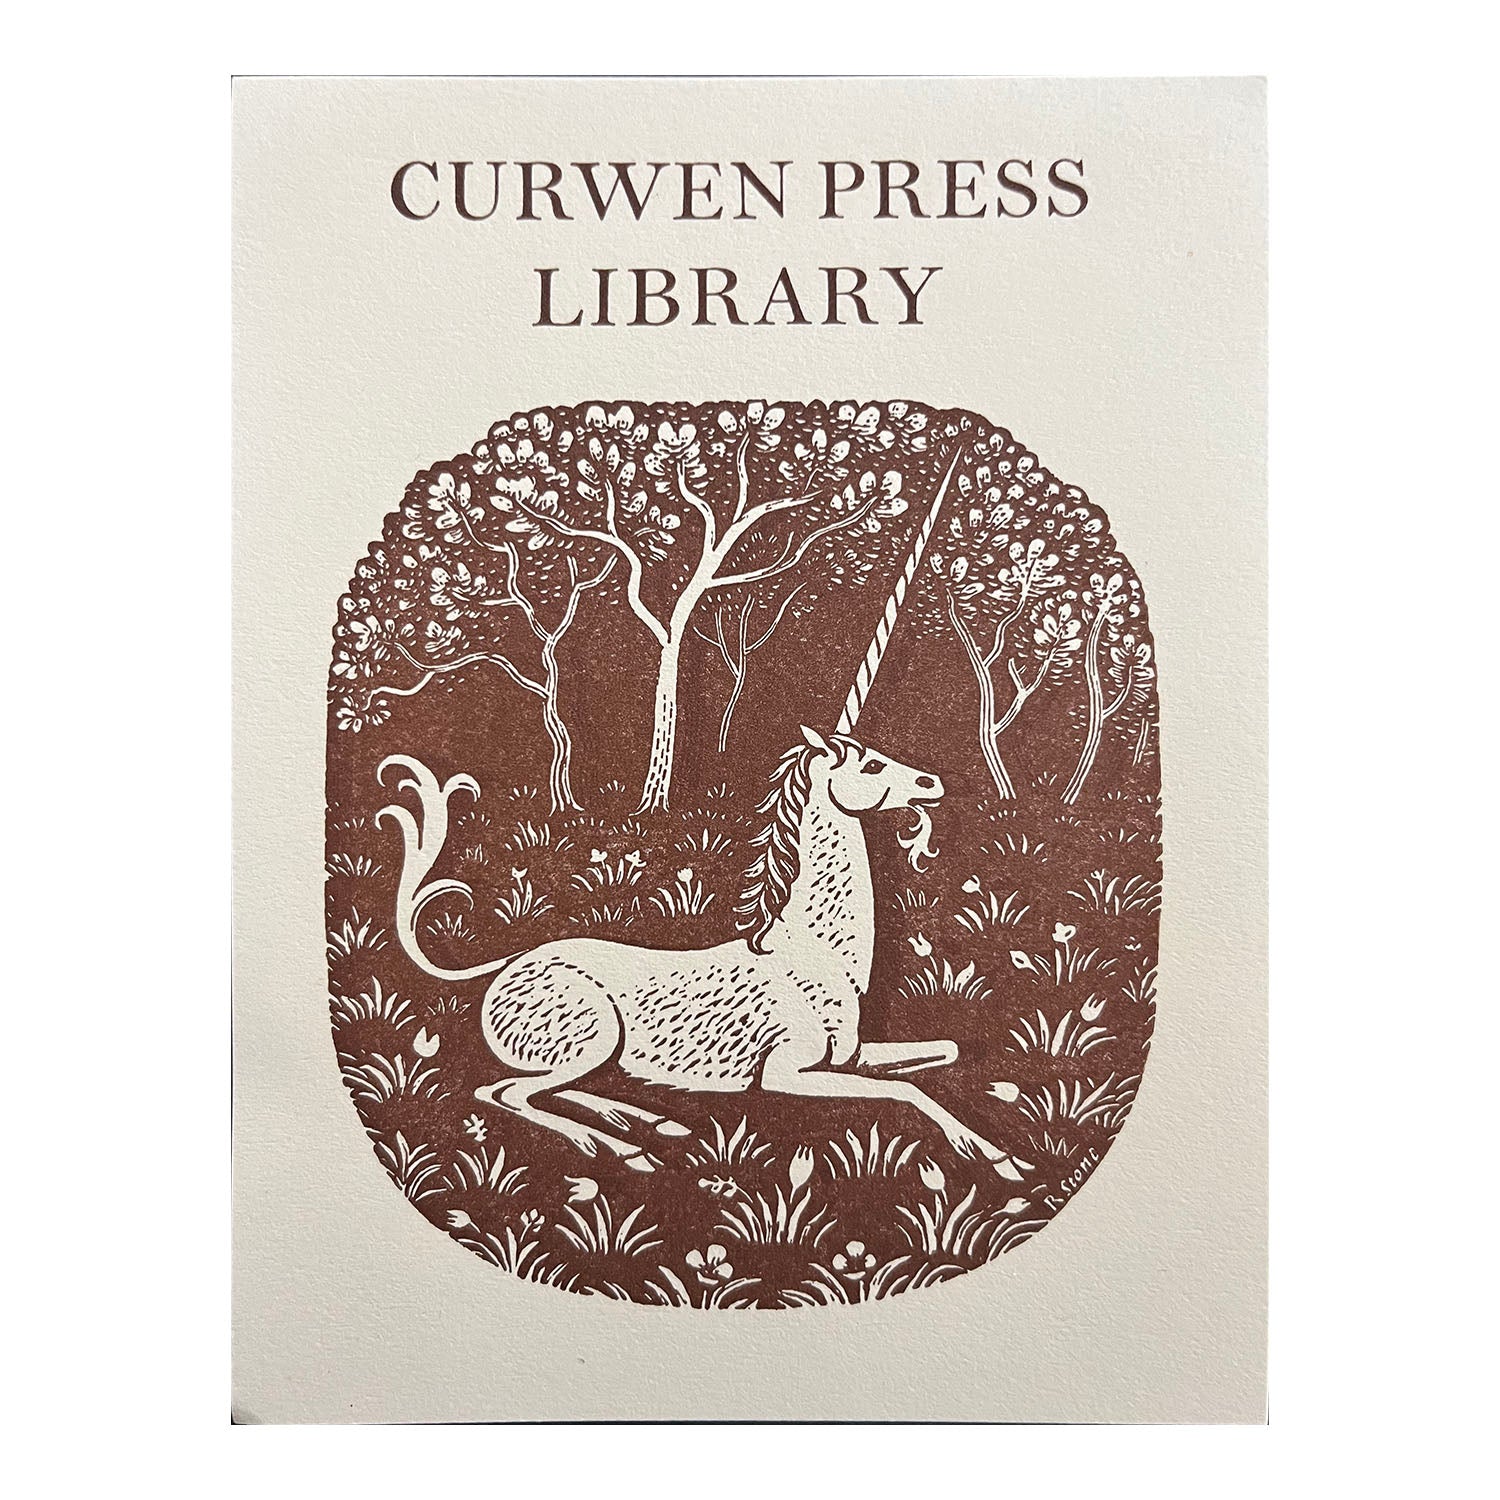 Curwen Press Library book plate, printed at the Curwen Press for the famous printer's reference library.  The design features a resting unicorn in a woodland setting